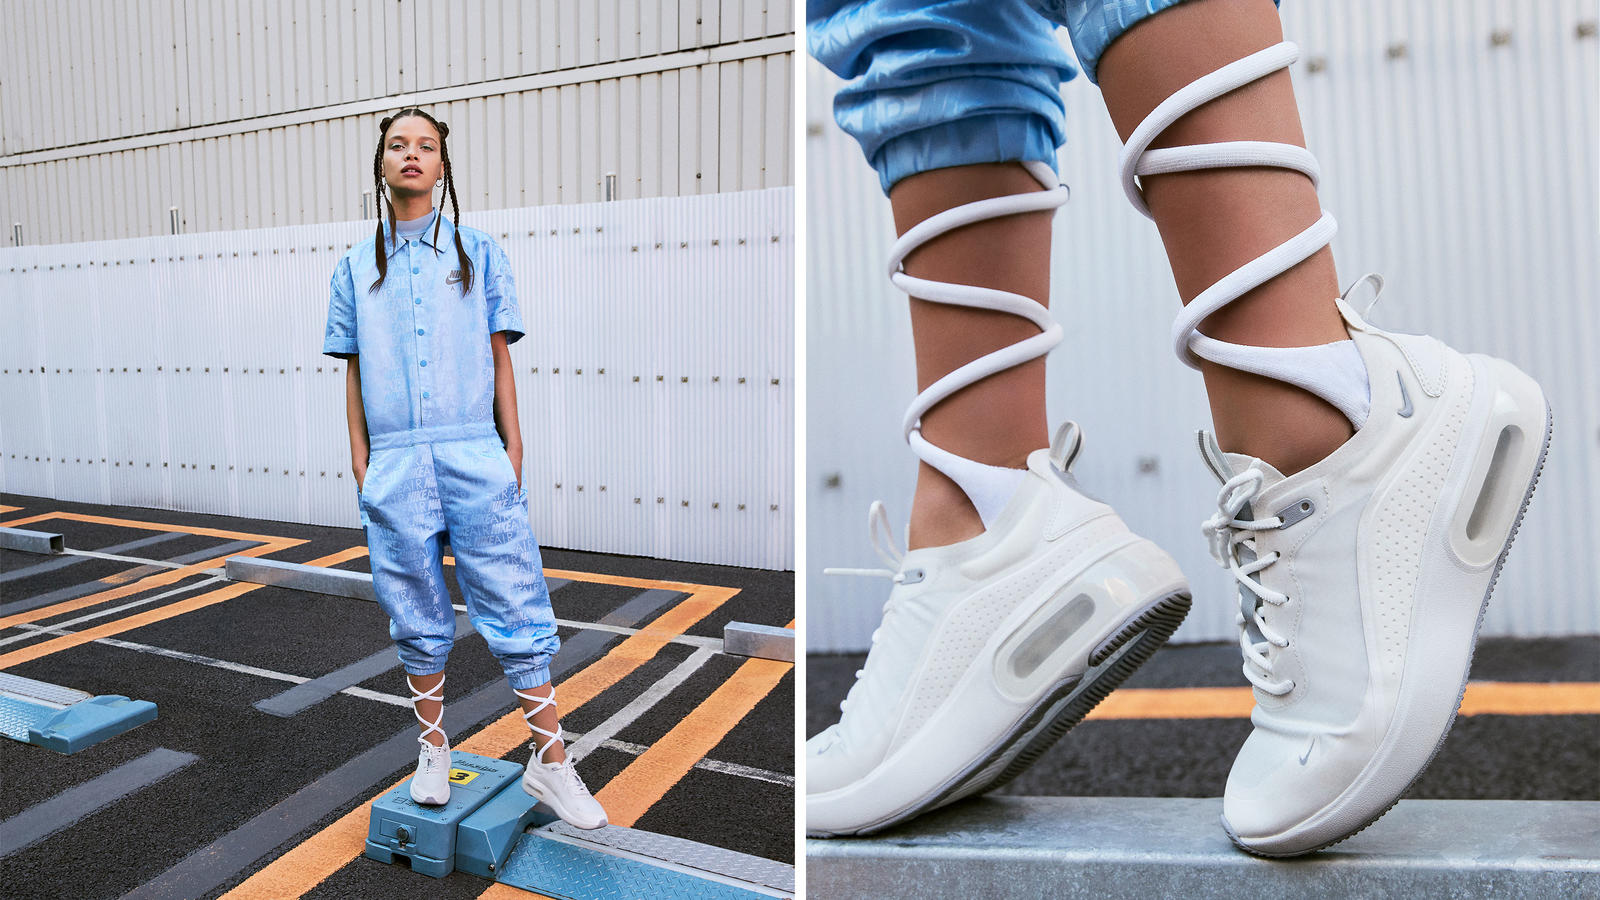 Nike Makes A Style Statement For Women With Air Max Dia Sneaker